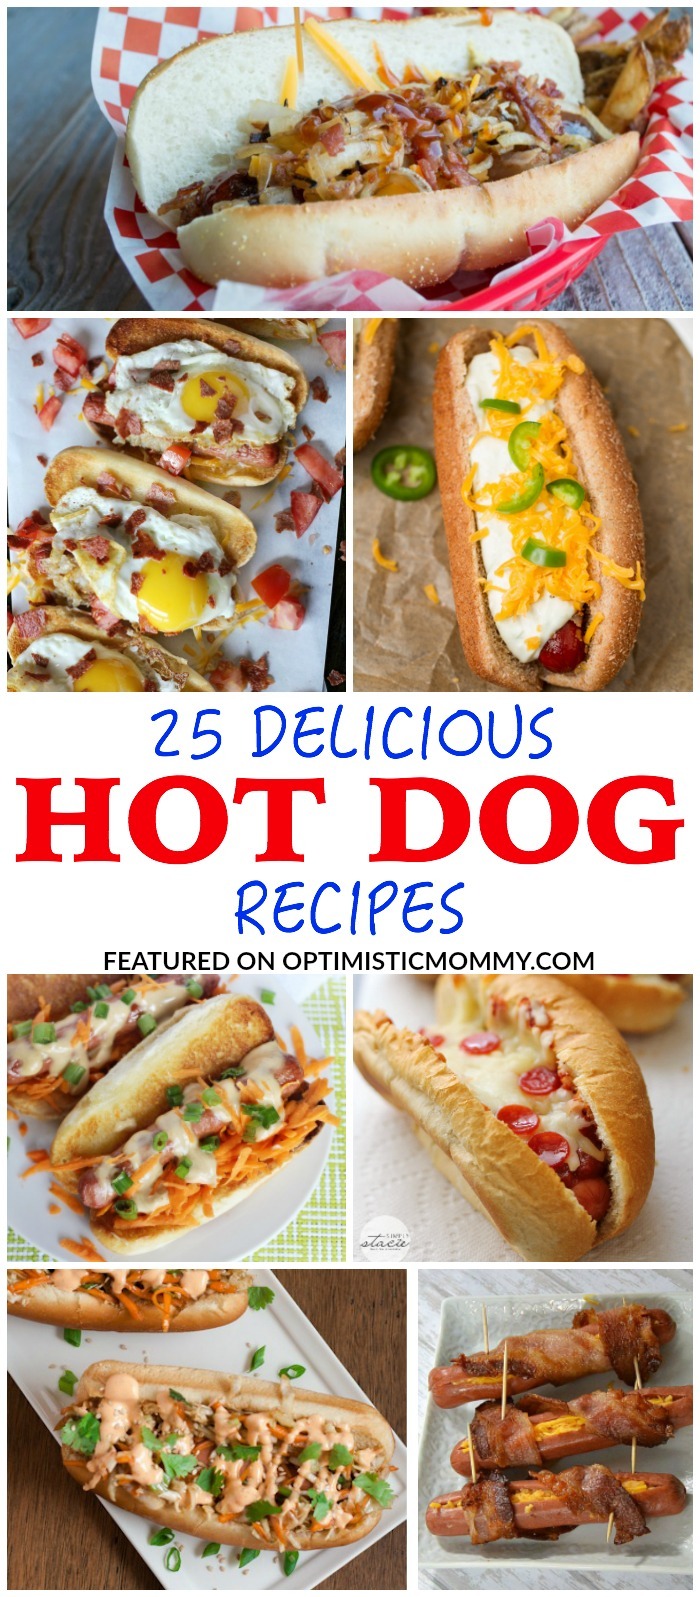 These delicious hot dog recipes are perfect for celebrating National Hot Dog Day!